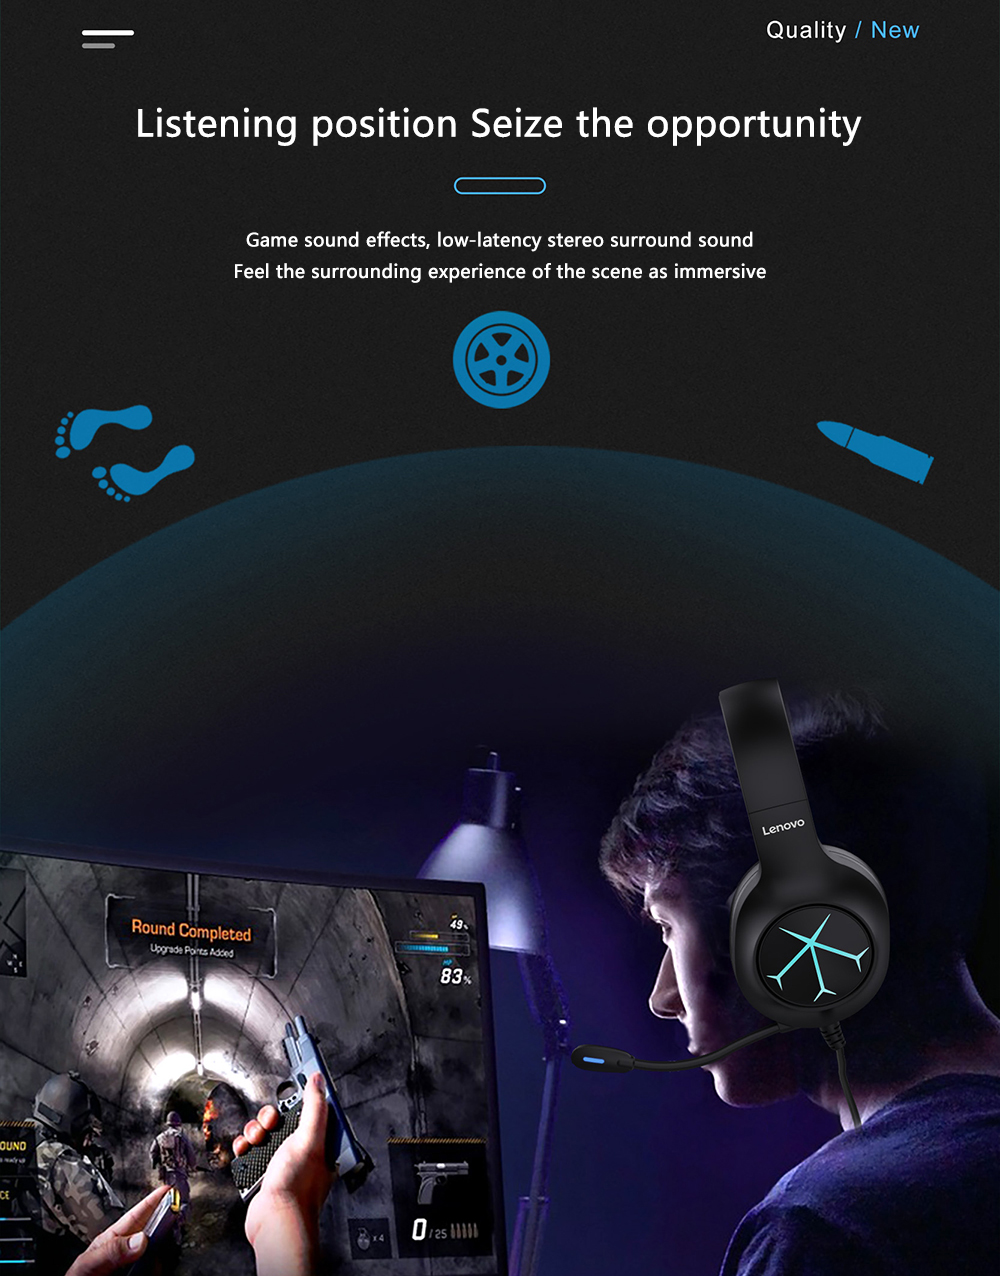 Lenovo-G60-Wired-Headset-71-Stereo-Blue-Light-Over-Ear-Gaming-Headphone-with-Mic-Noise-Canceling-USB-1896835-3